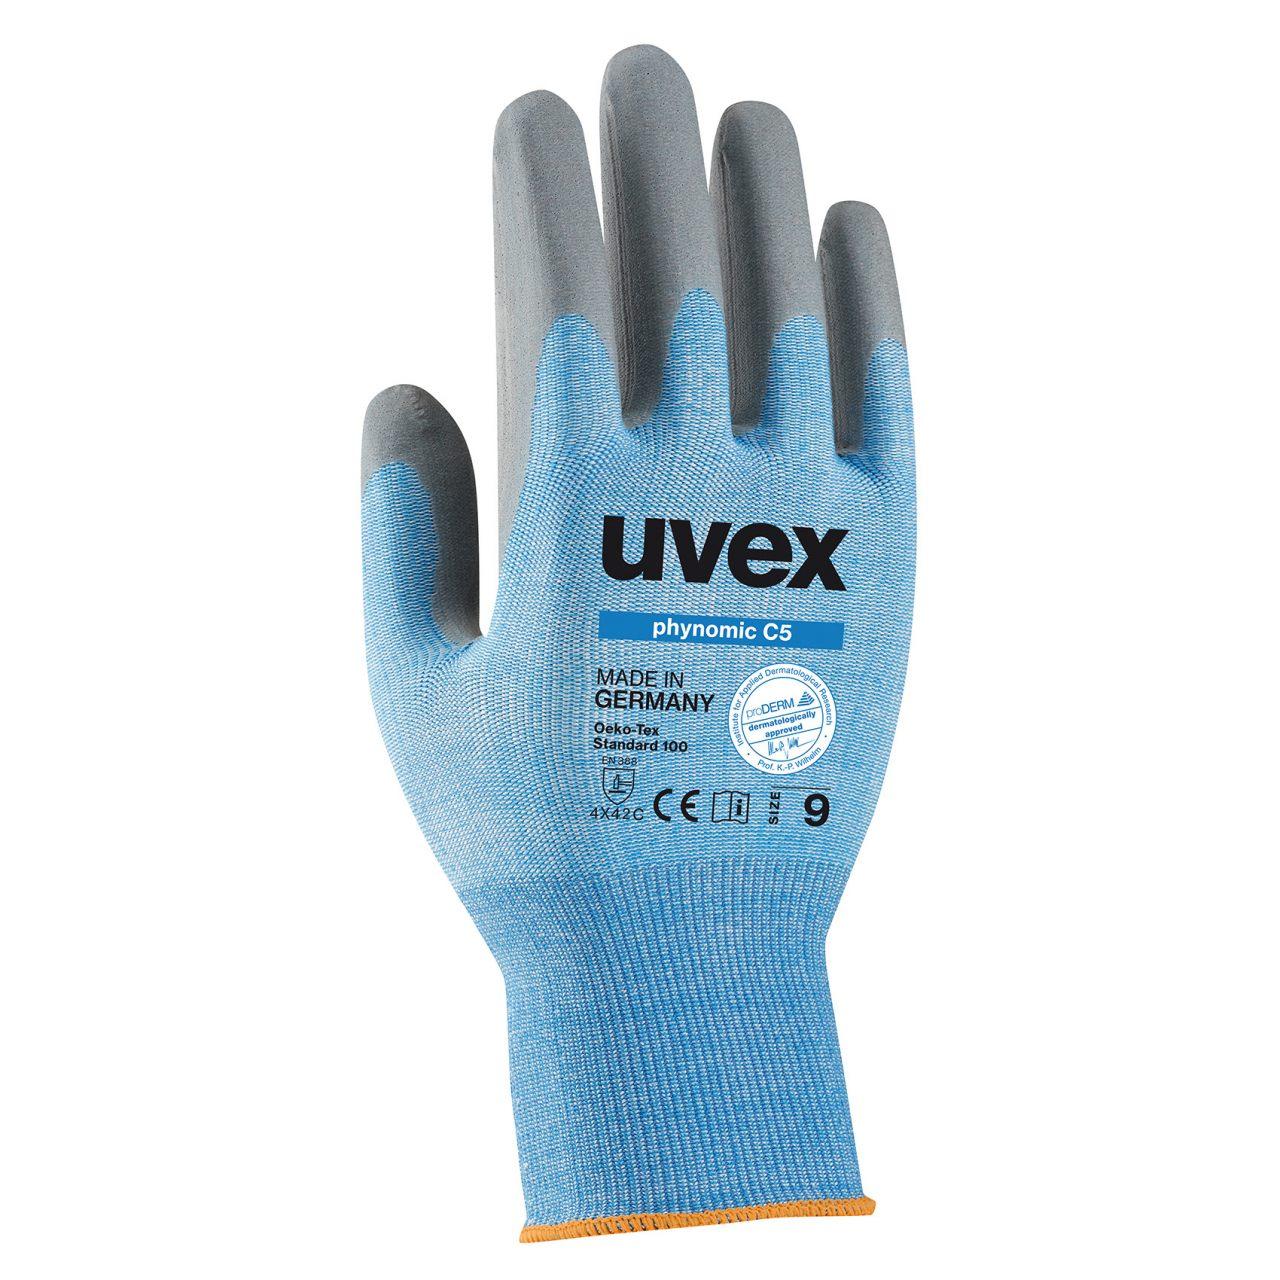 Next Level Cut Protection. The uvex Phynomic Series